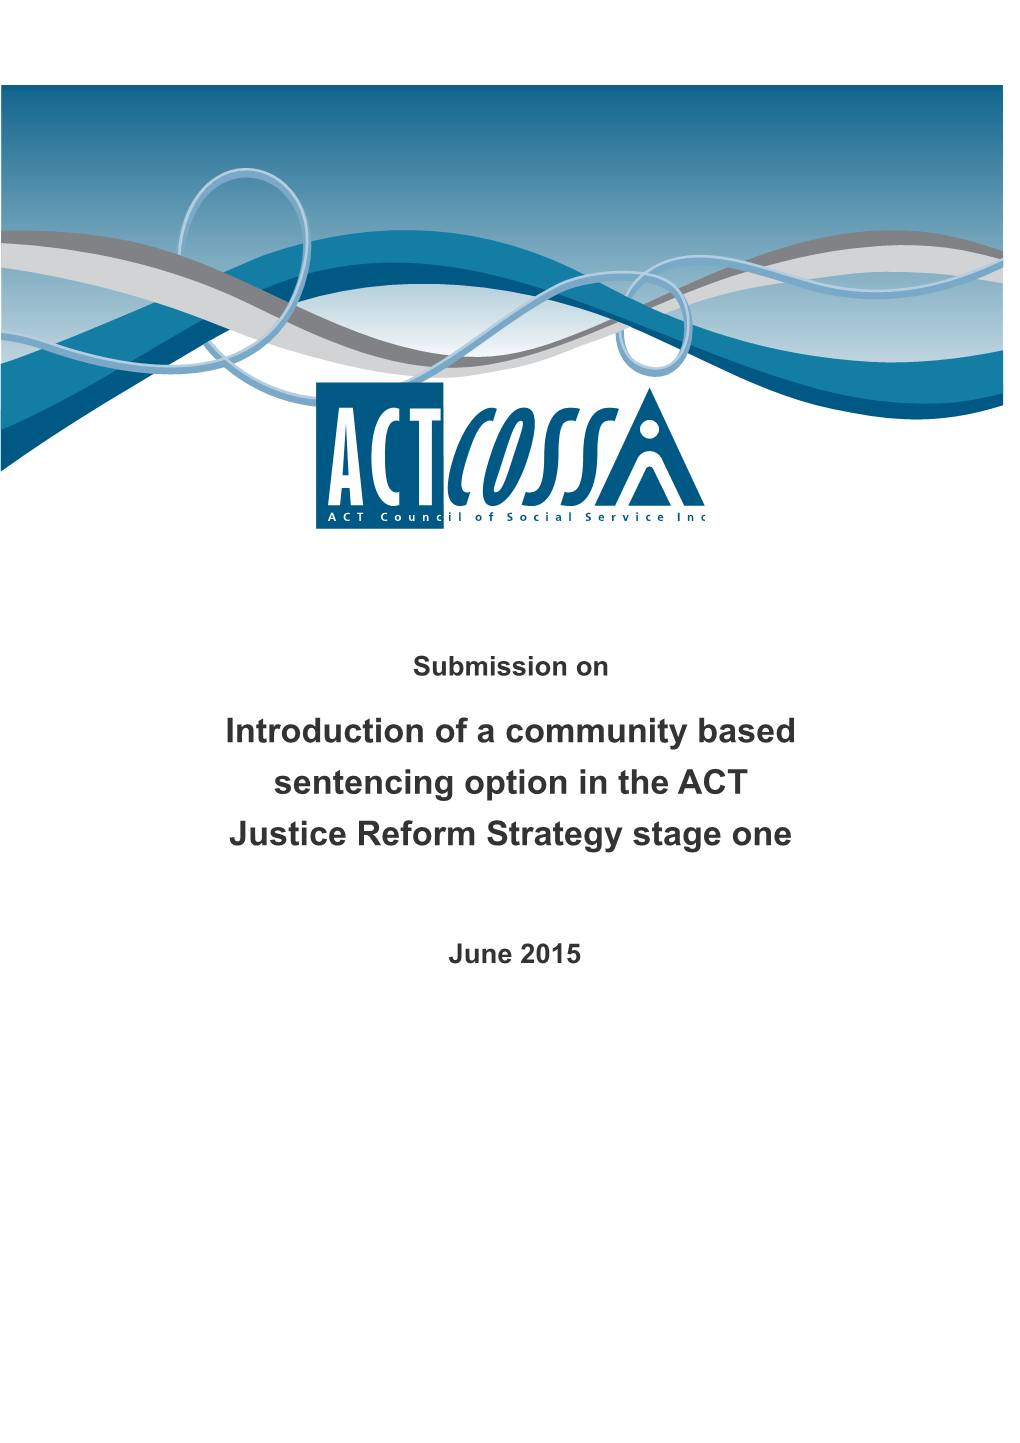 Introduction of a Community Based Sentencing Option in the ACT Justice Reform Strategy